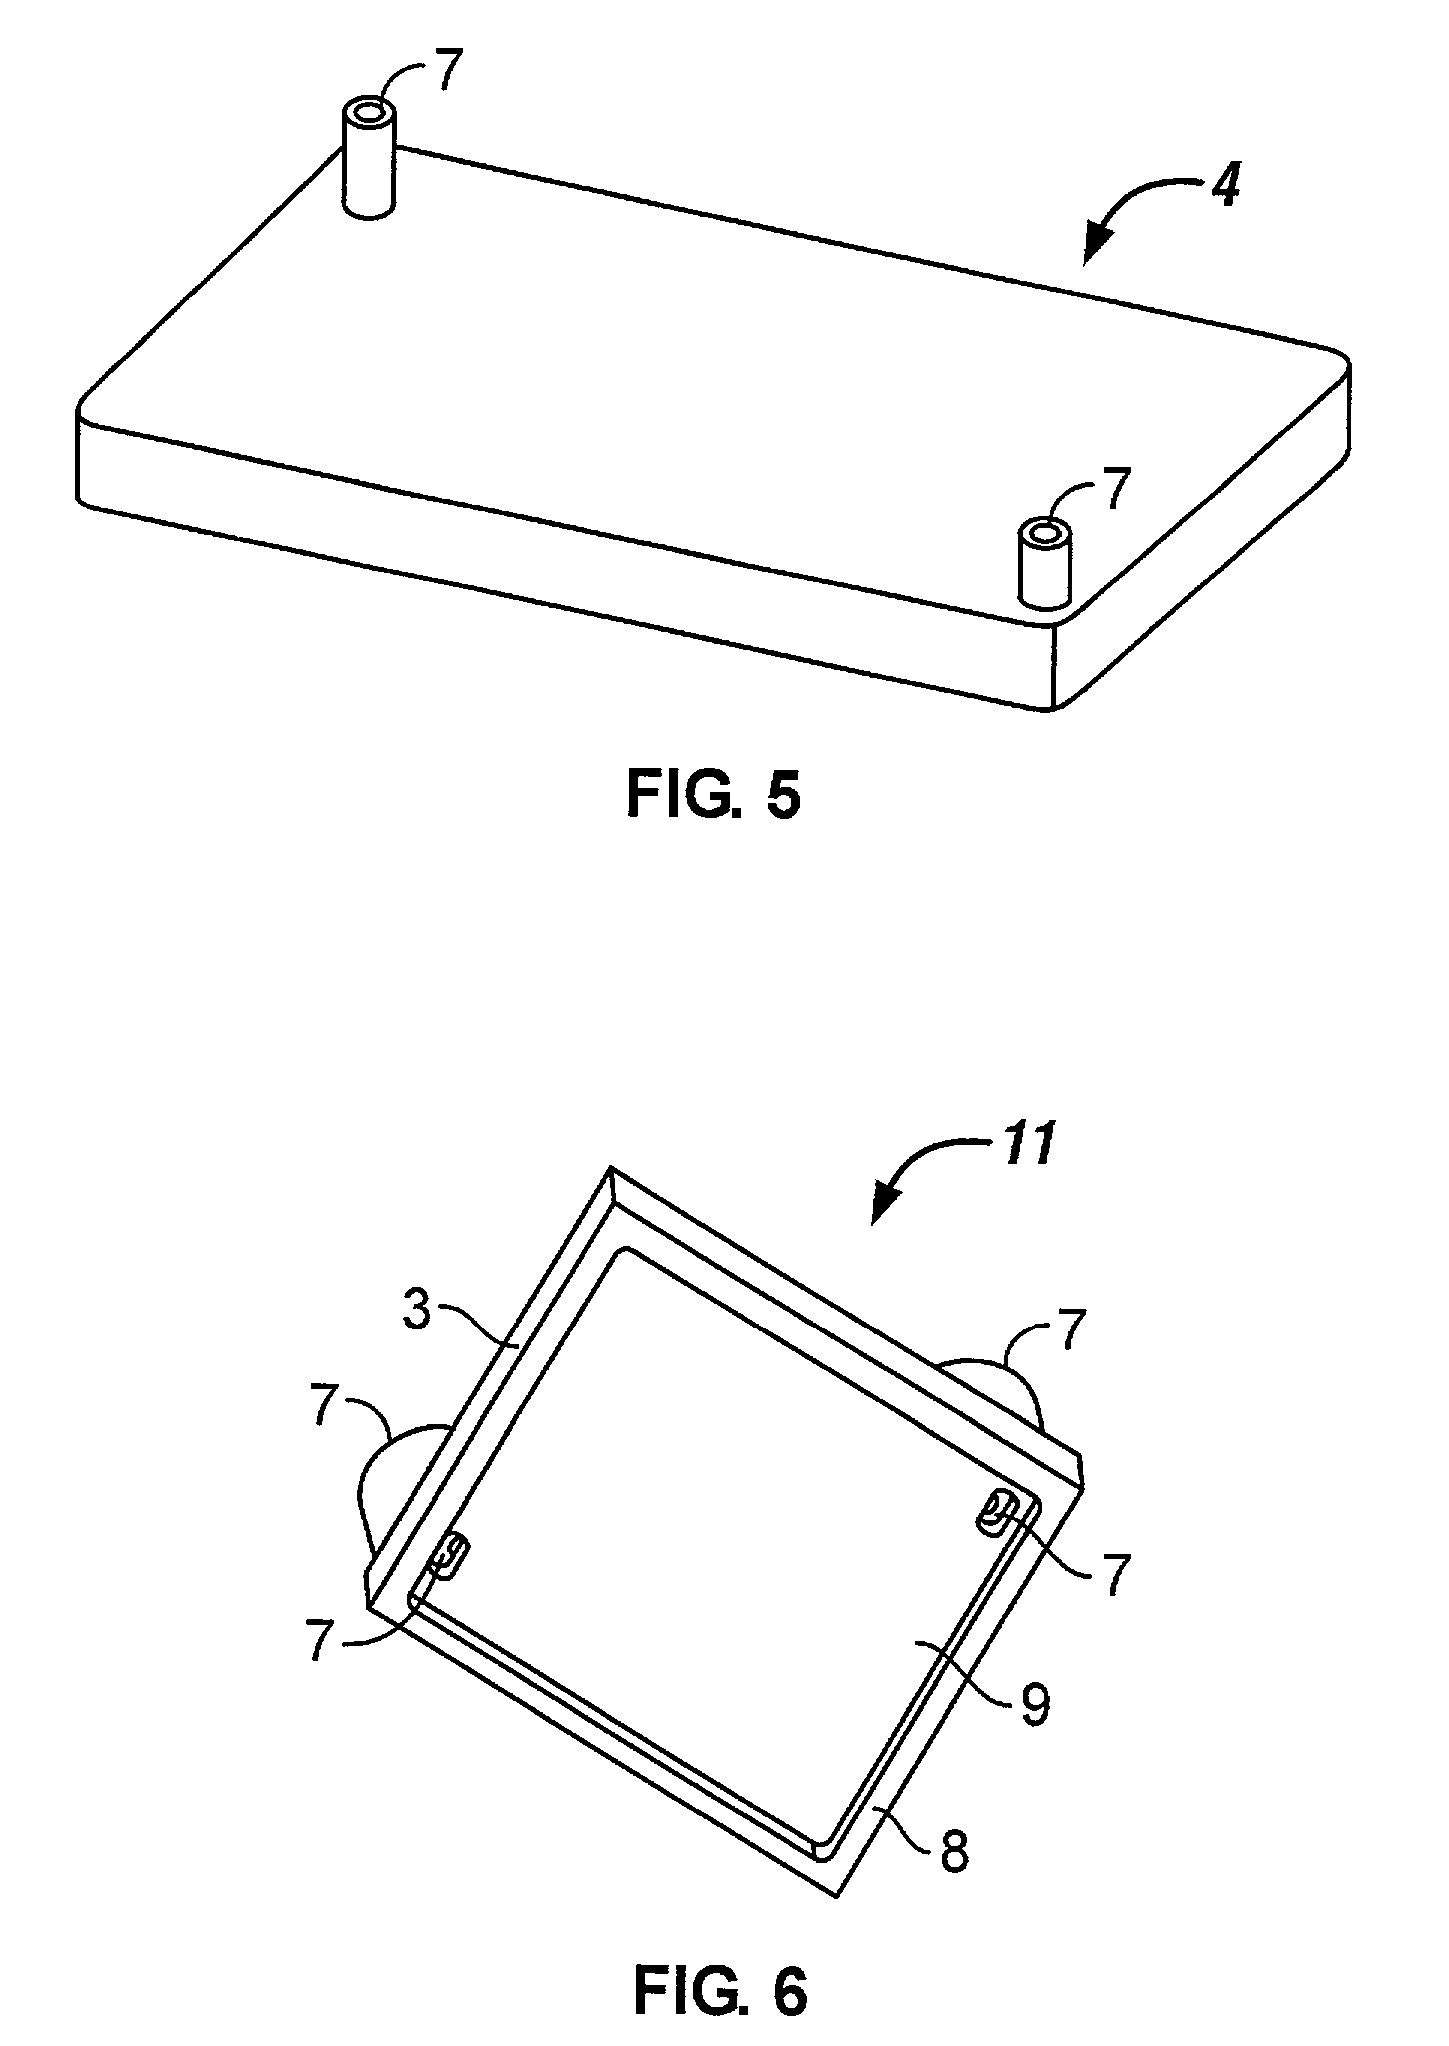 Array assay devices and methods of using the same